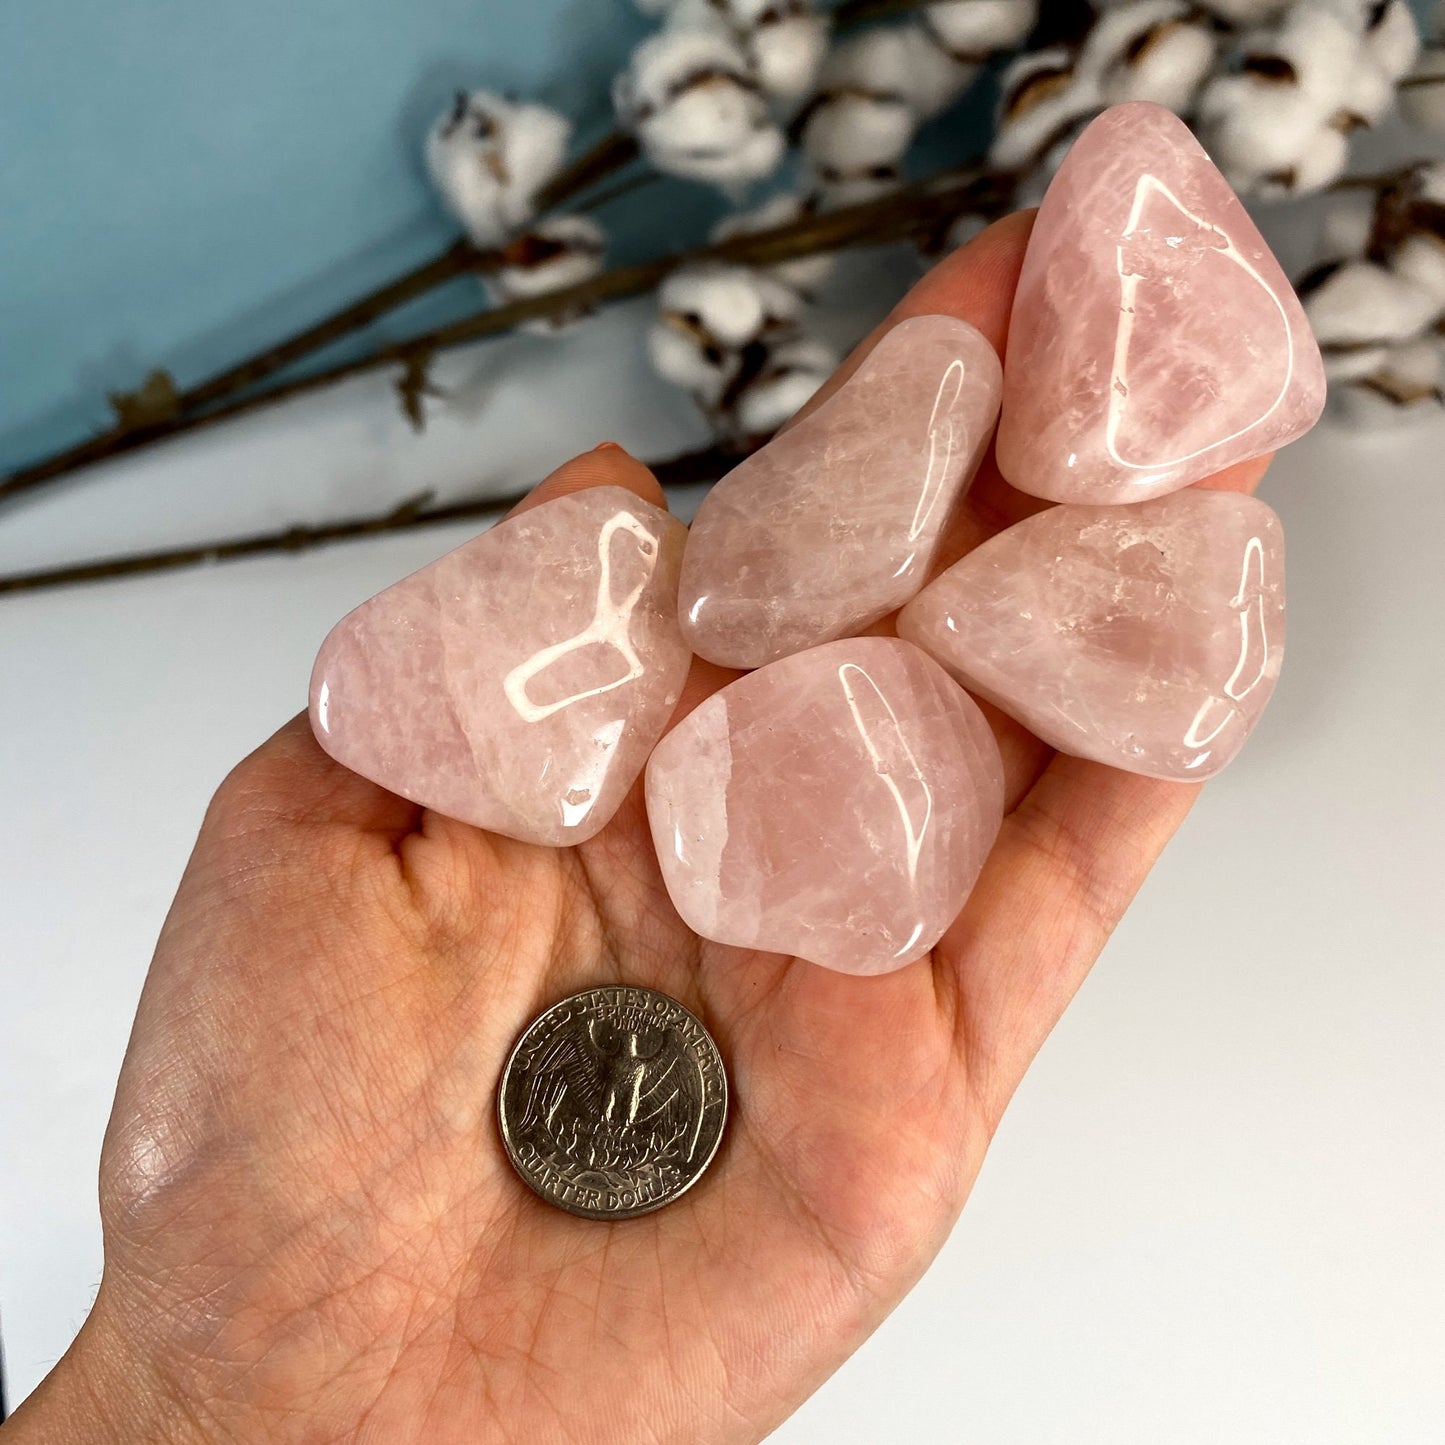 Natural Rose Quartz Crystal - Pink Tumbled Stone - Love and Passion Crystals - genuine healing stones for heart chakra